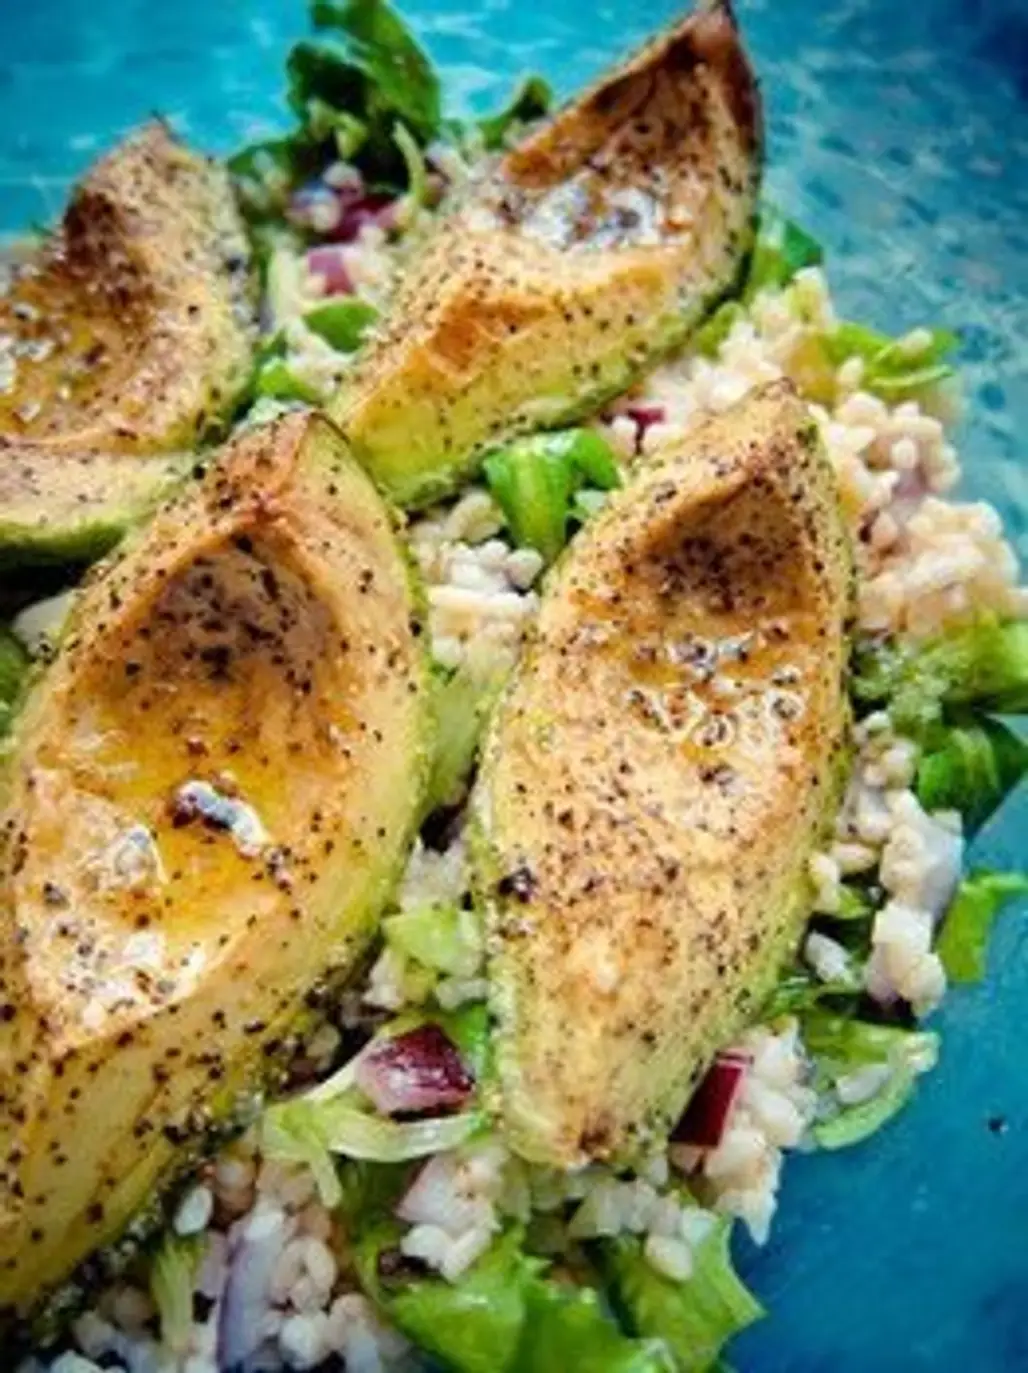 Roasted Avocado over Couscous Salad